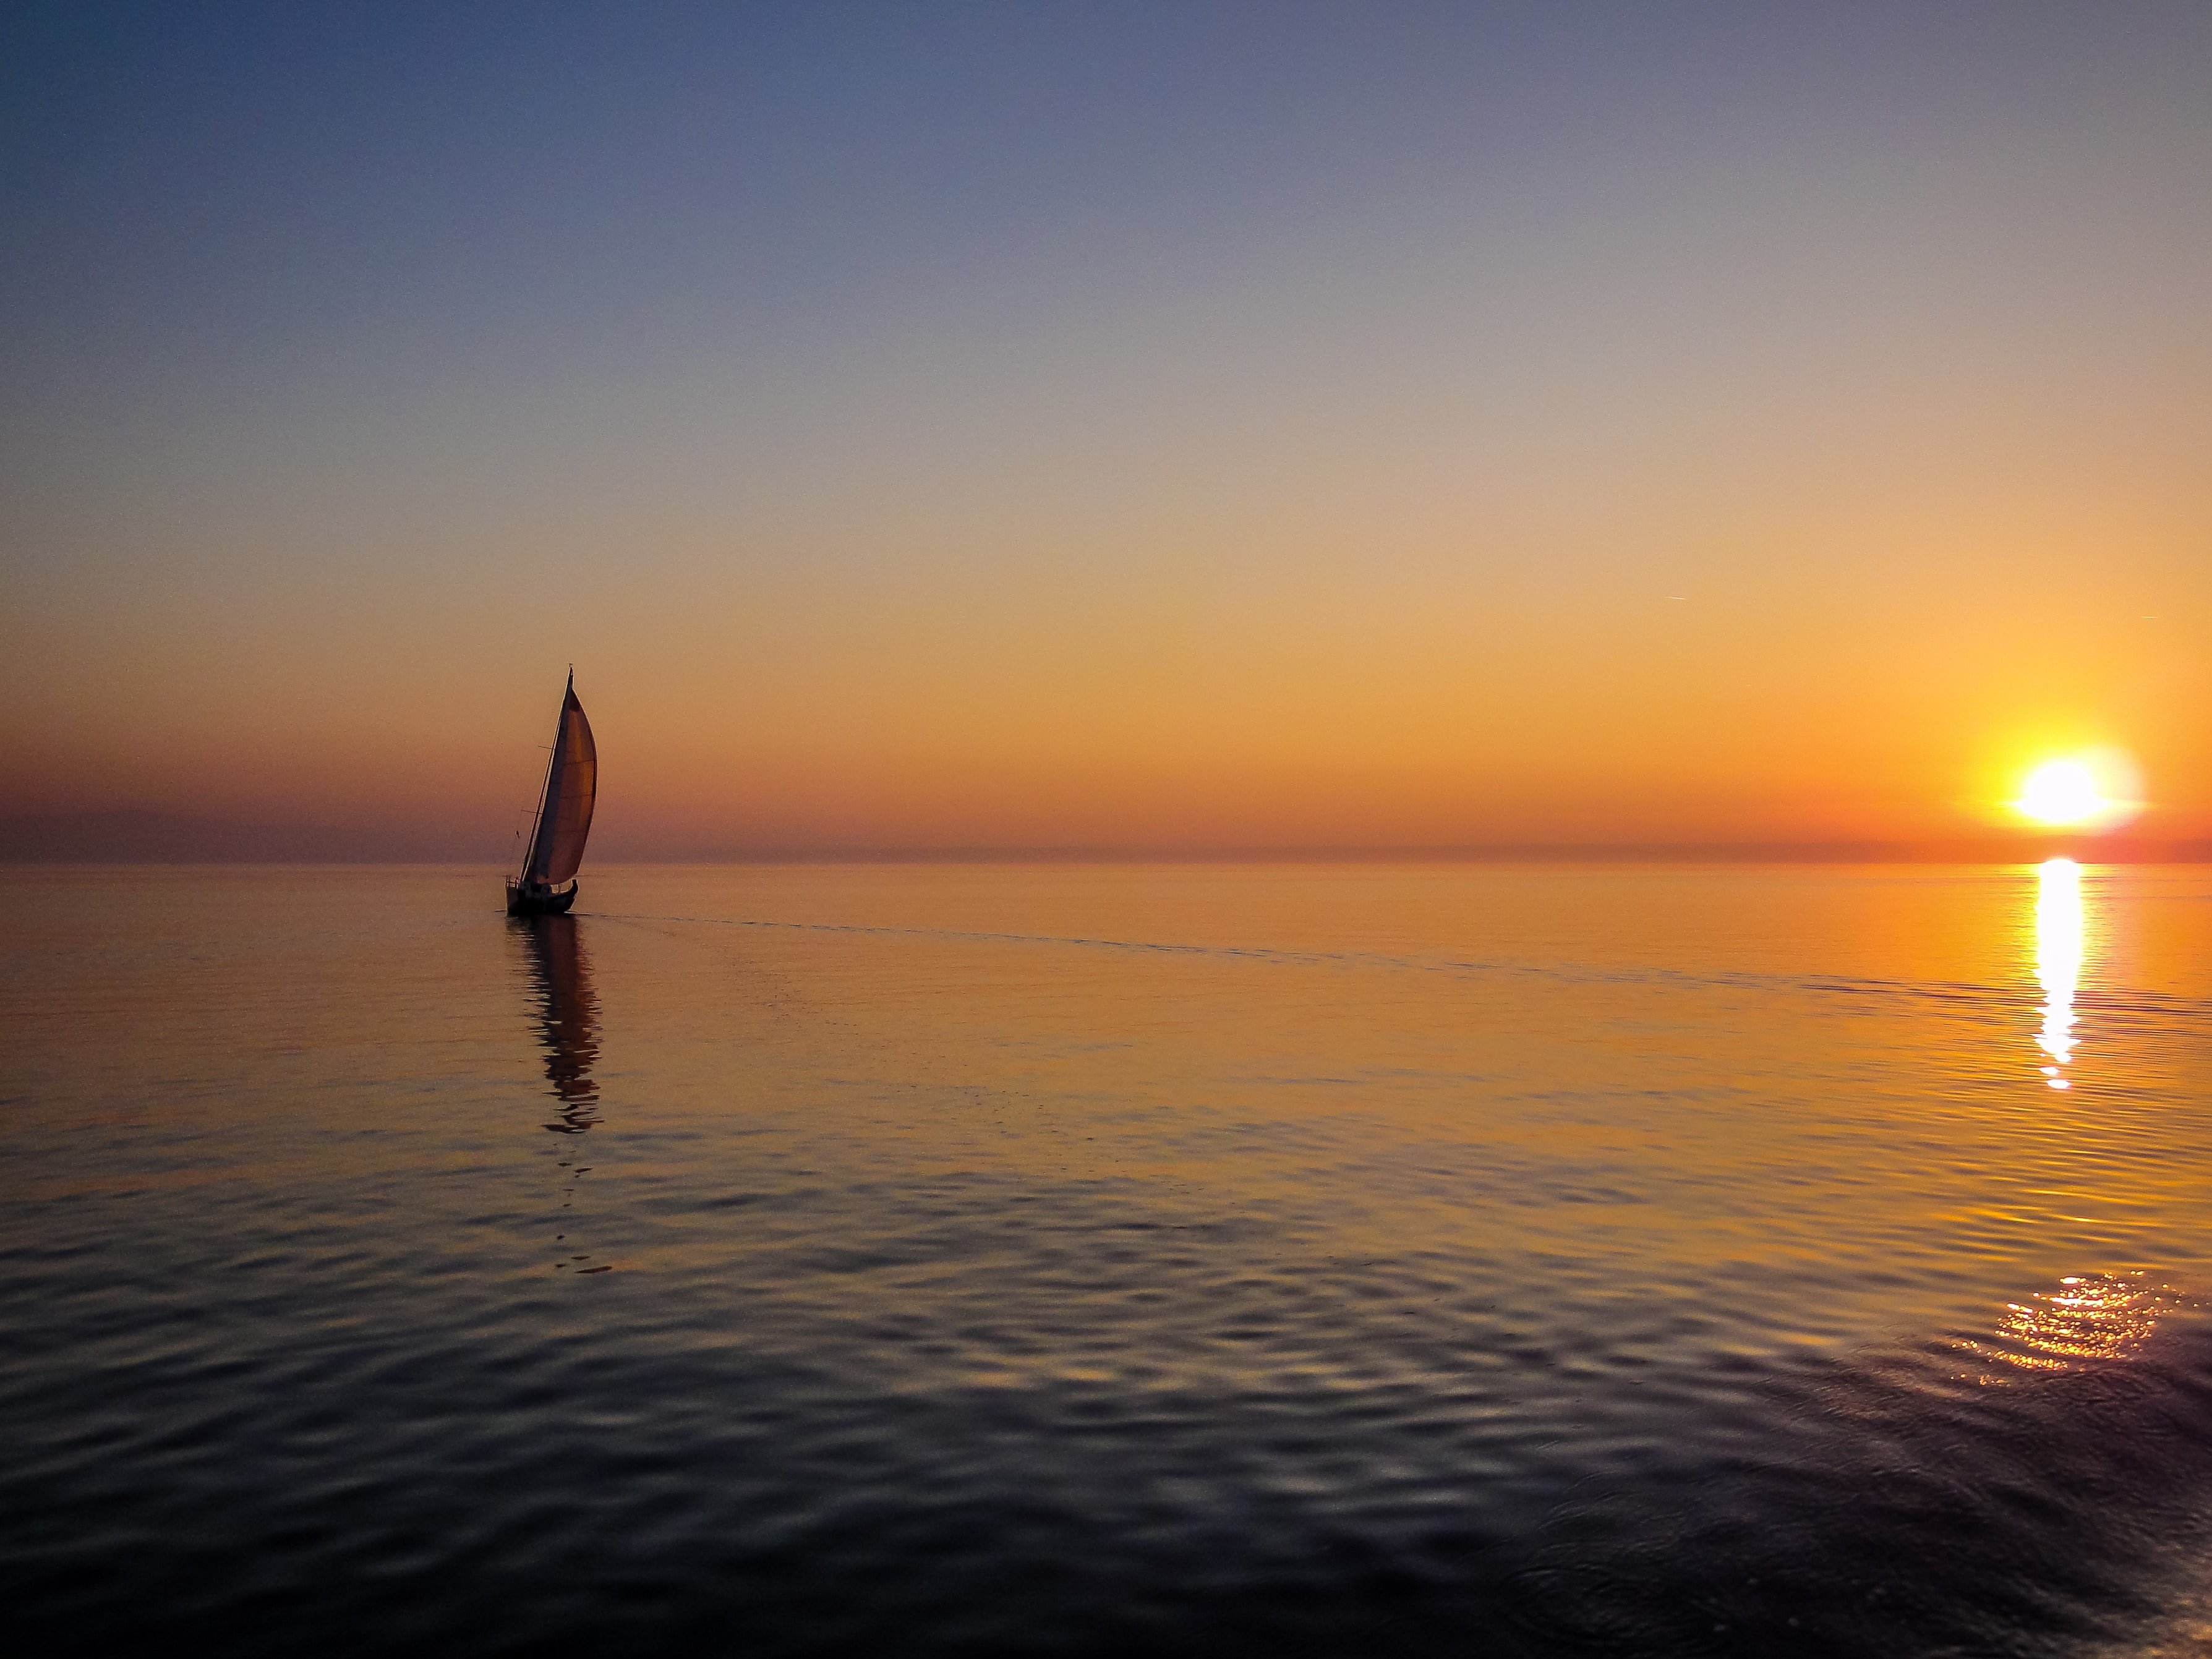 Beautiful image of the sunset over the water with a boat in the distance